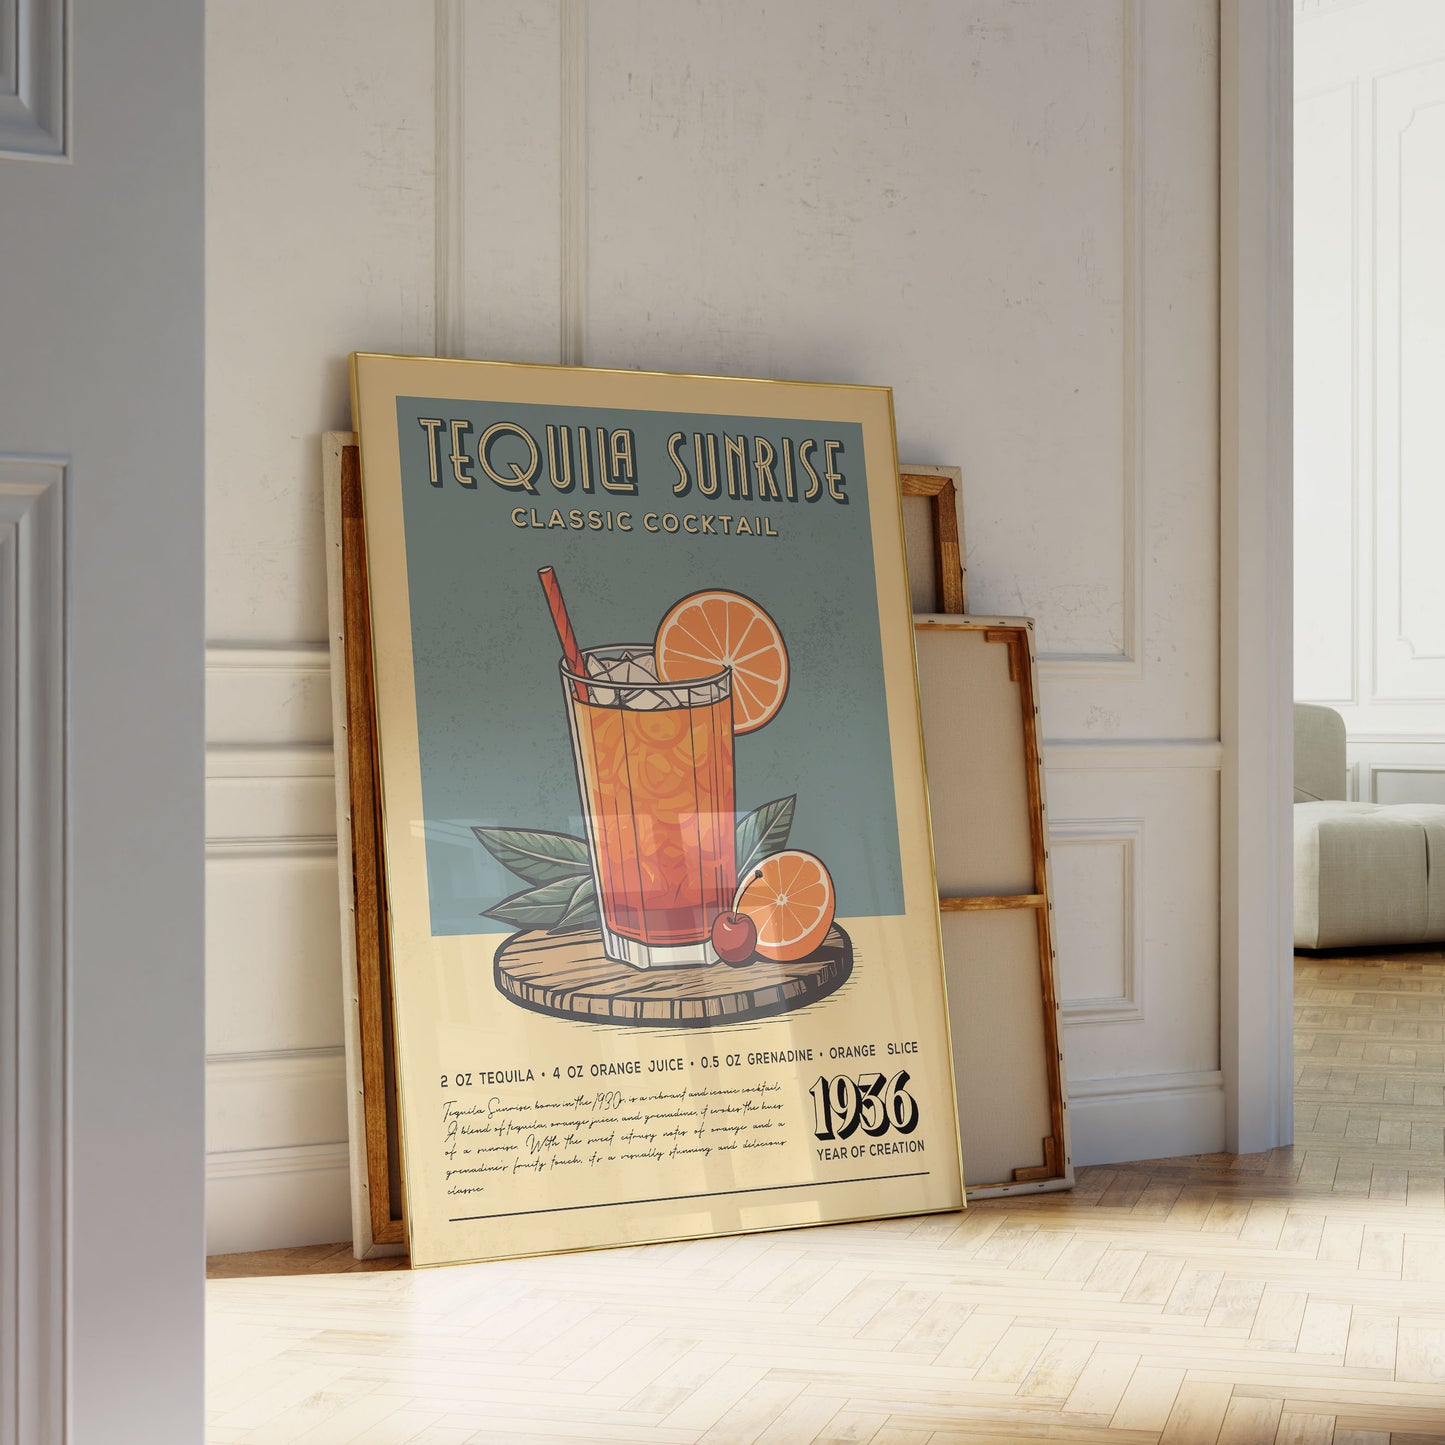 Tequila Sunrise - Classic Cocktail Poster